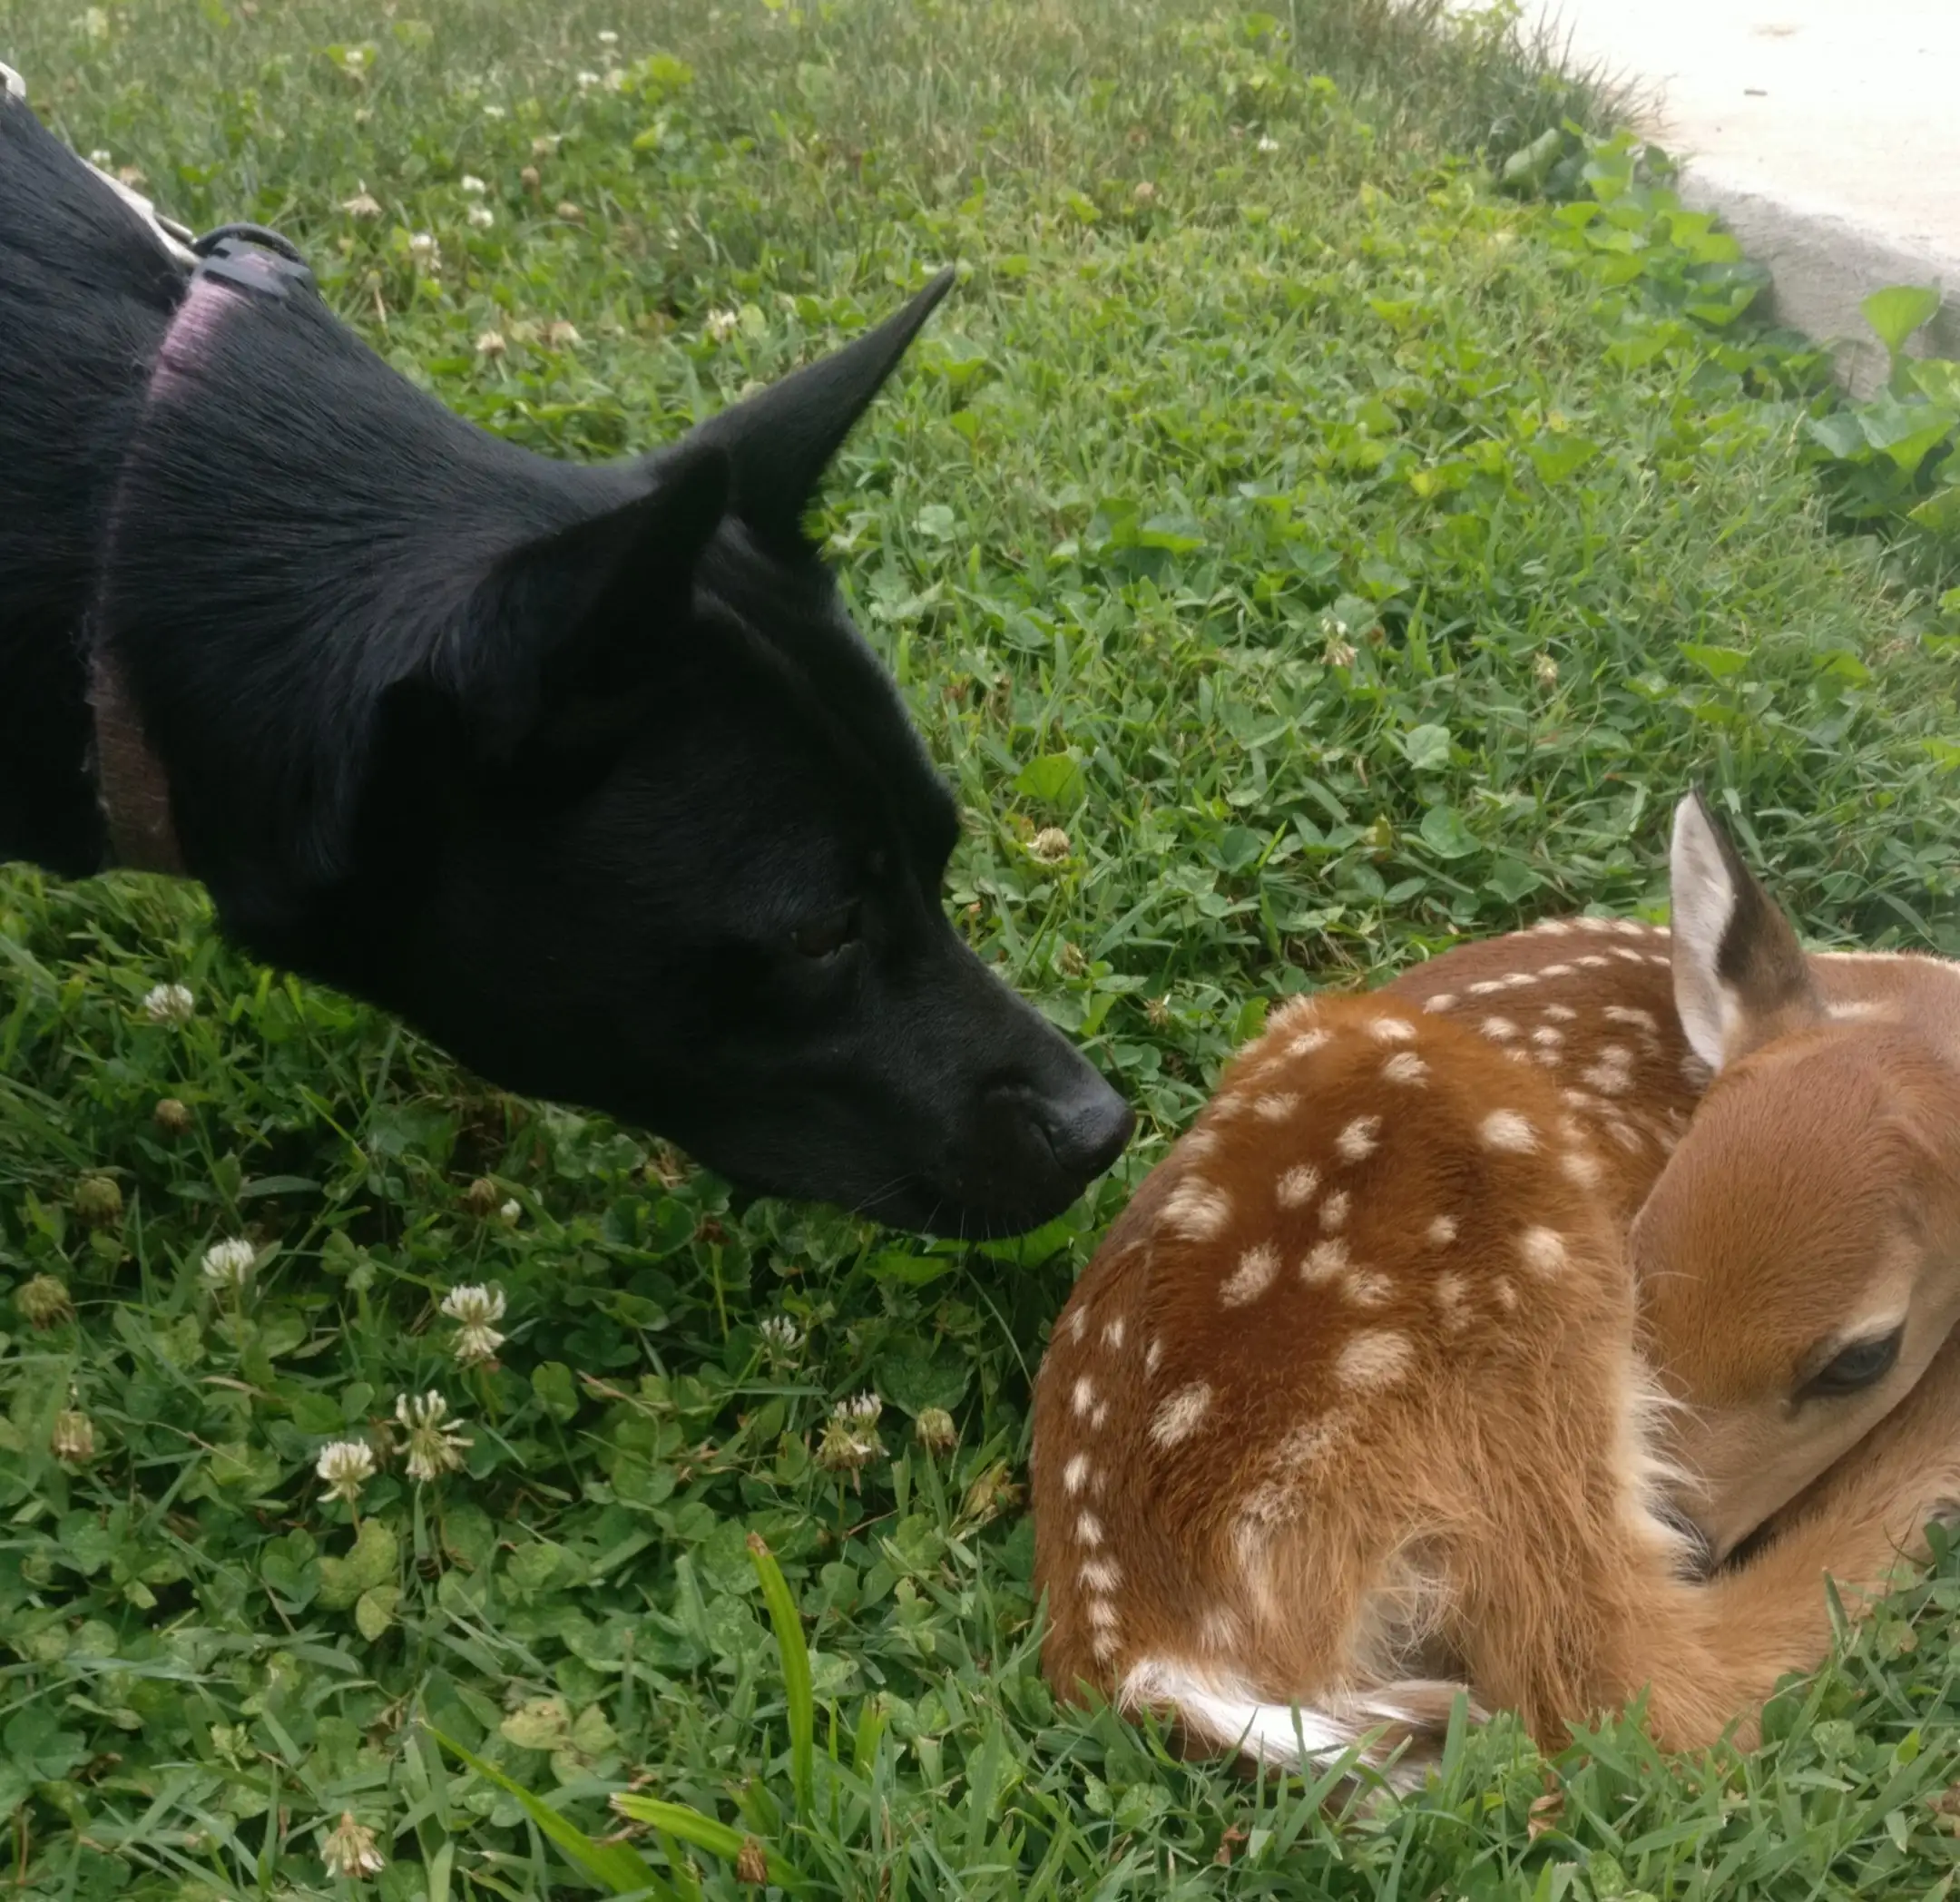 My Jack Russell mix giving the fawn a sniff but largely not caring about it.